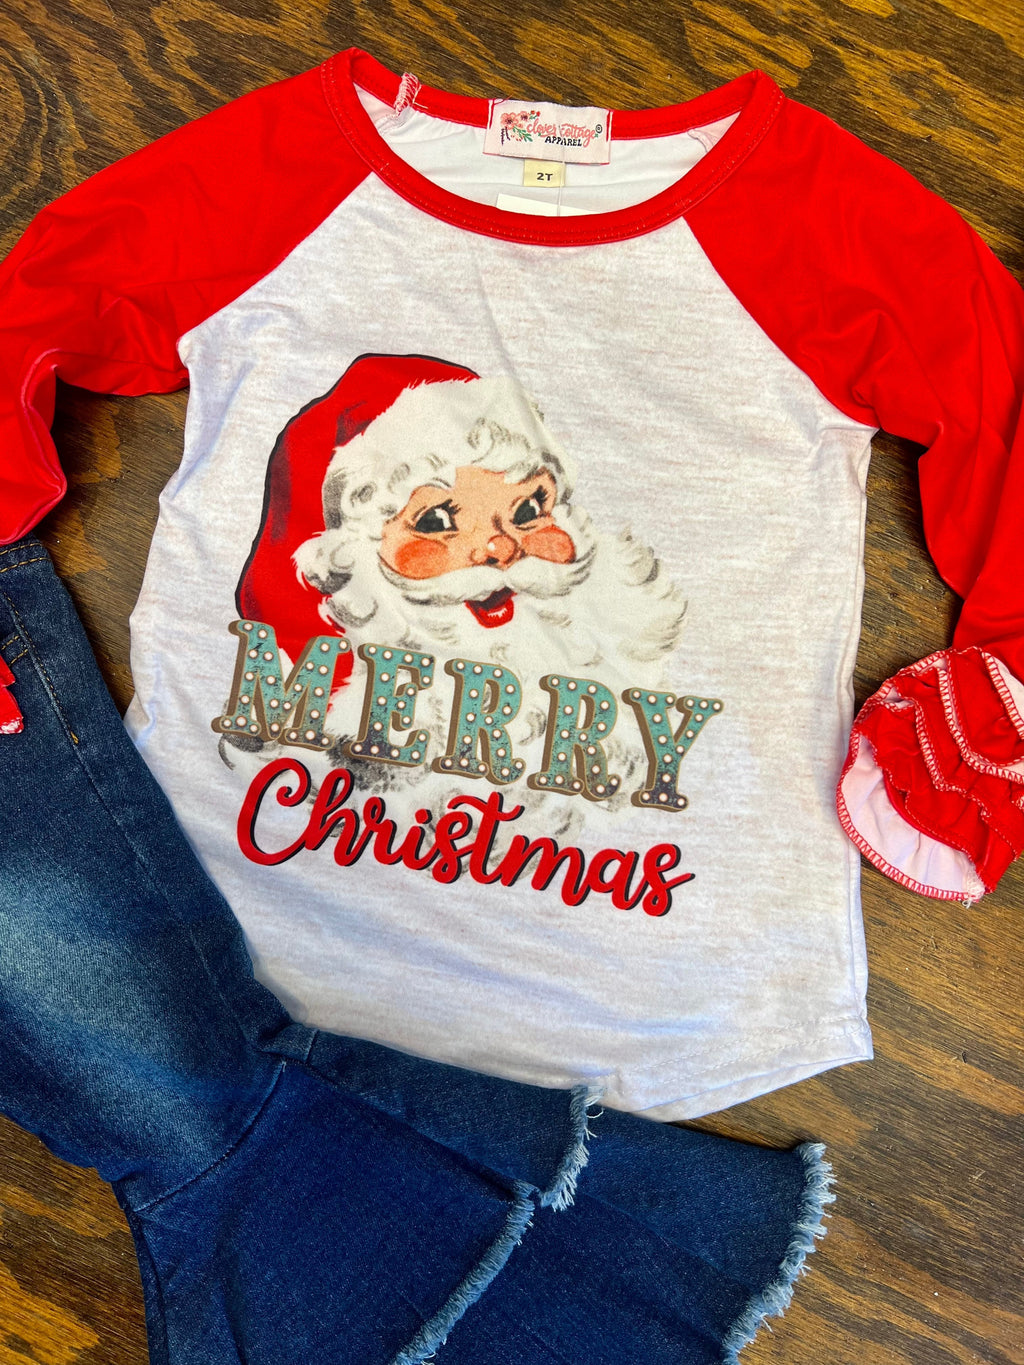 Be the talk of the town with this unique KIDS Vintage and Merry Top! Featuring a white raglan base, fun red ruffled sleeves, and a Santa Claus graphic, this tee is sure to be a hit. With the words "Merry Christmas" and a vintage Santa Claus, you'll be festive and funny! ! Ho-Ho-Holy Raglan Time! 95% Cotton 5% Spandex